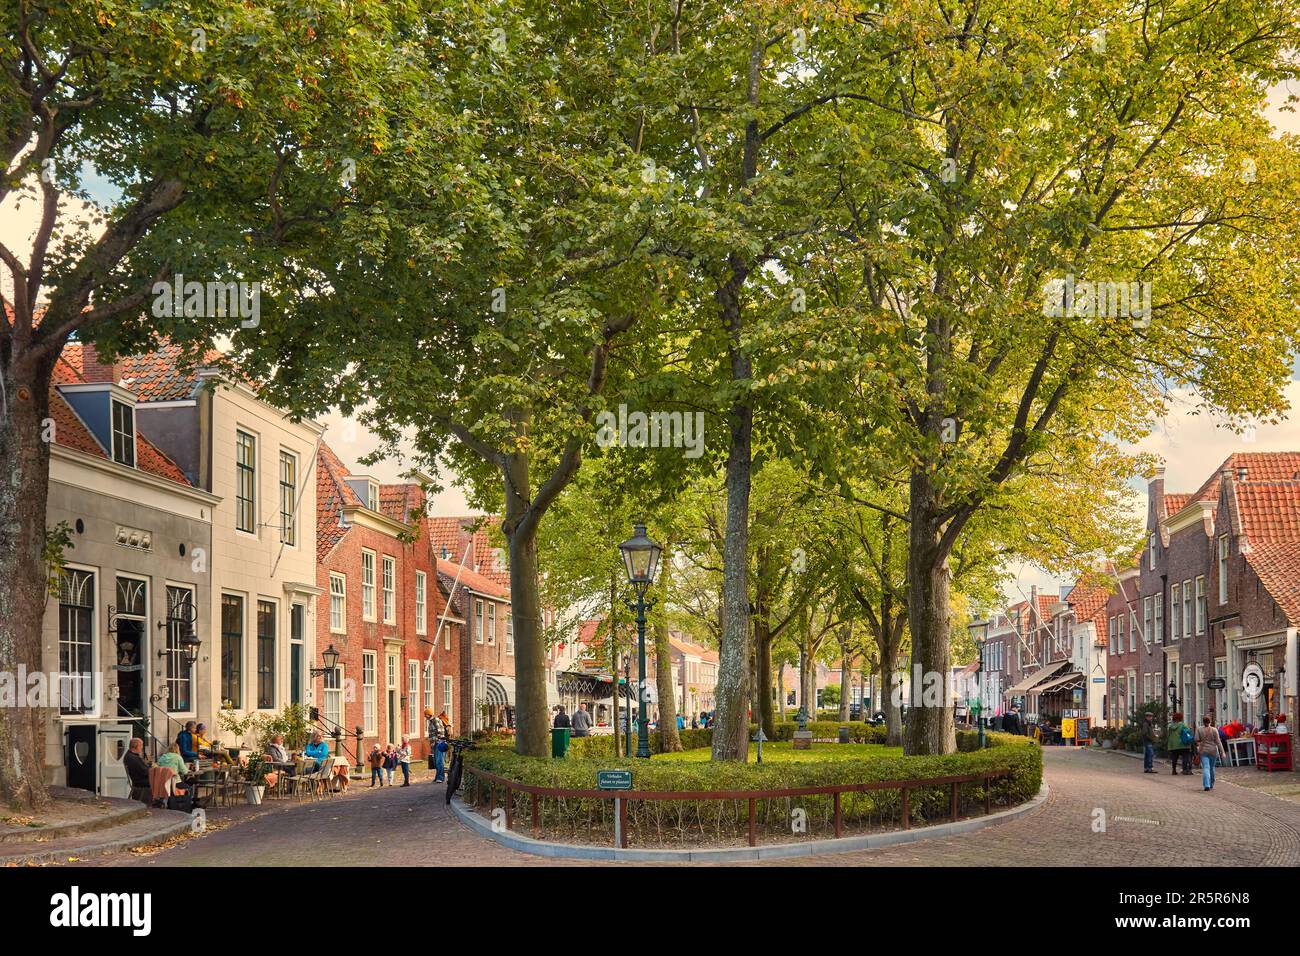 Veere, The Netherlands - October 11, 2022: The central historic street with shops, bars and restaurants in the ancient Dutch city center of Veere in Z Stock Photo